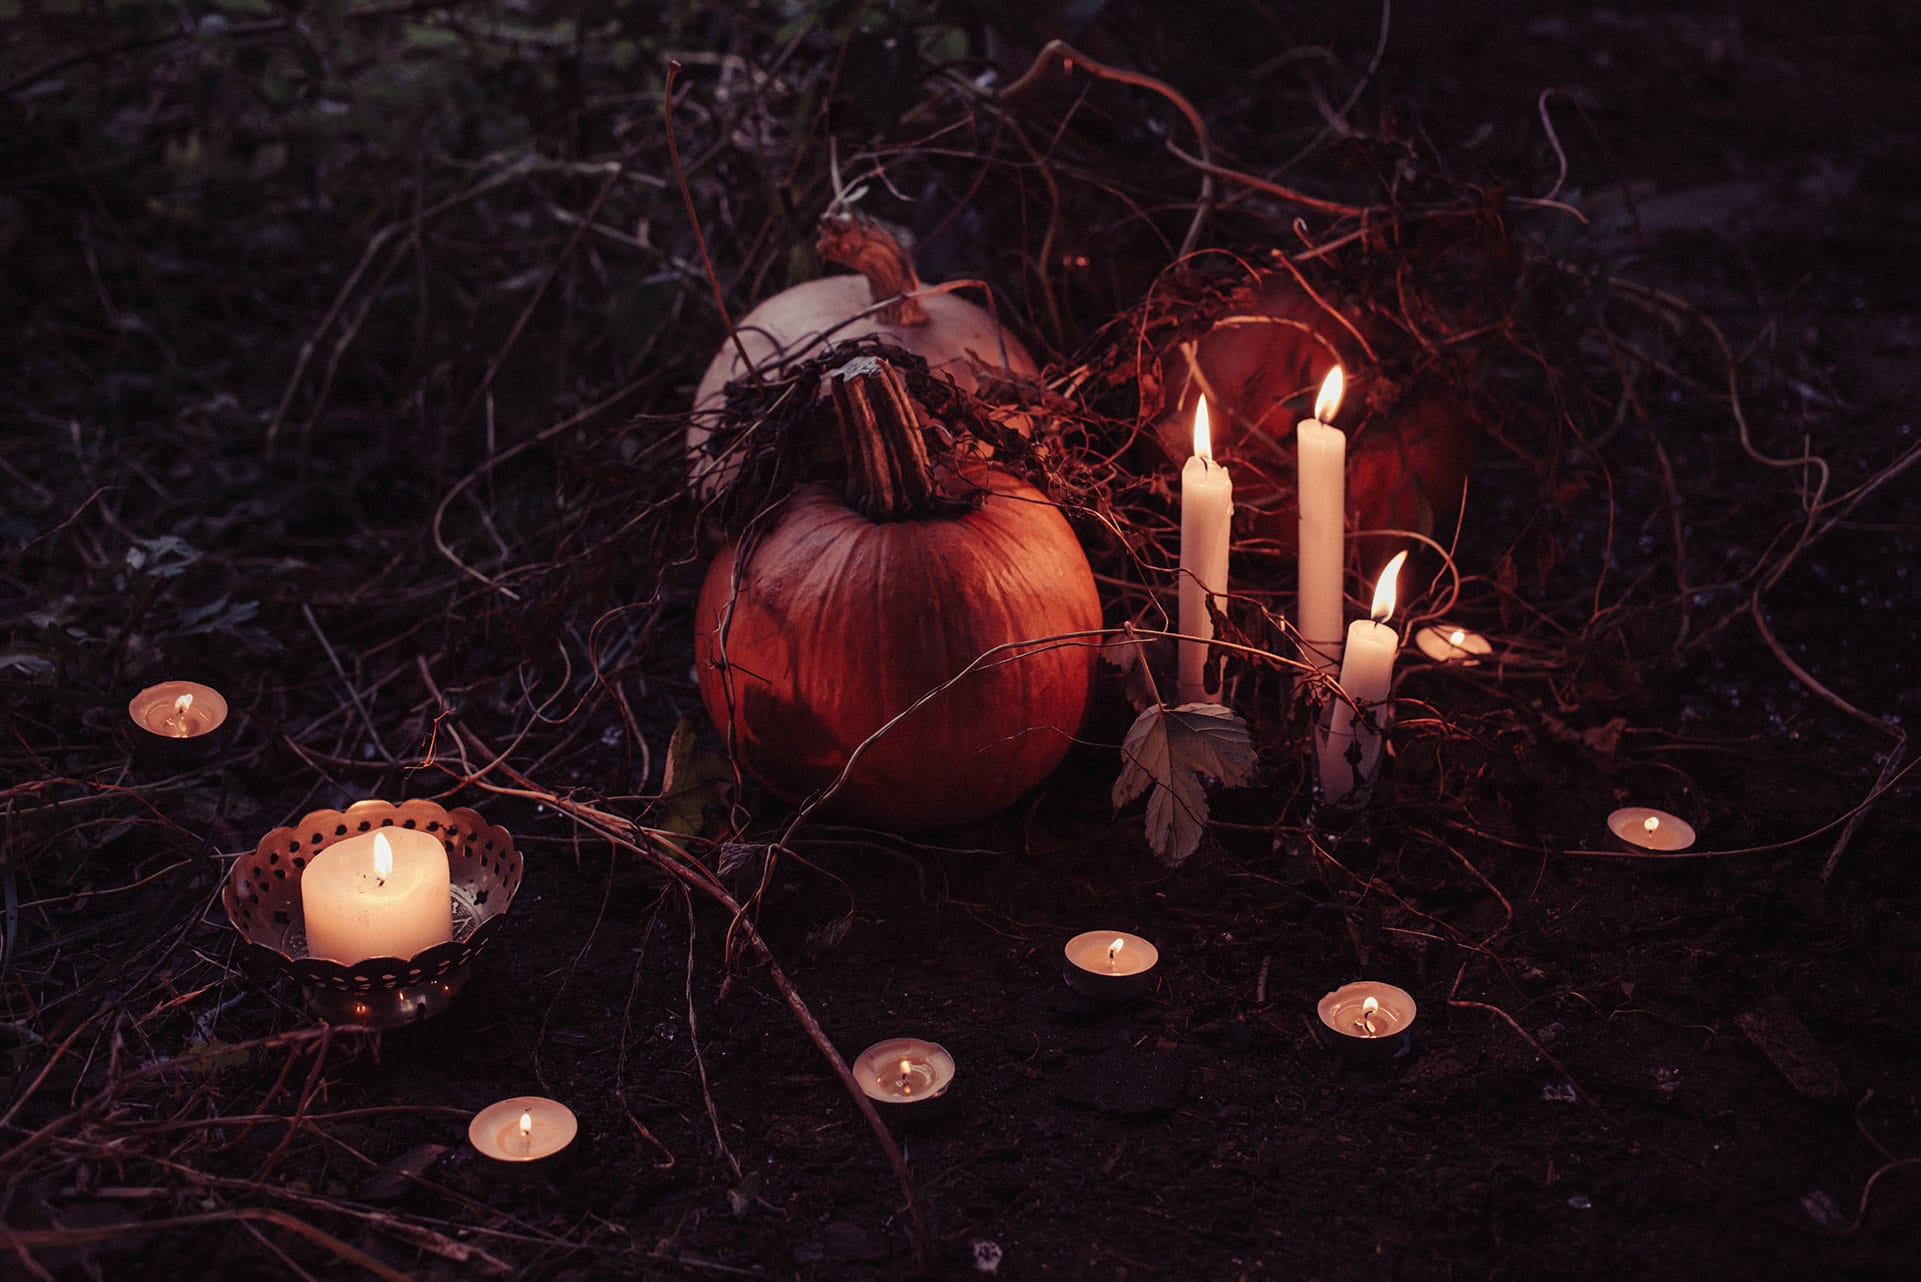 An atmospheric autumnal scene with pumpkins and flickering candles amidst tangled vines, creating a spooky and enchanting mood, perfect for a metaphysical shop display.